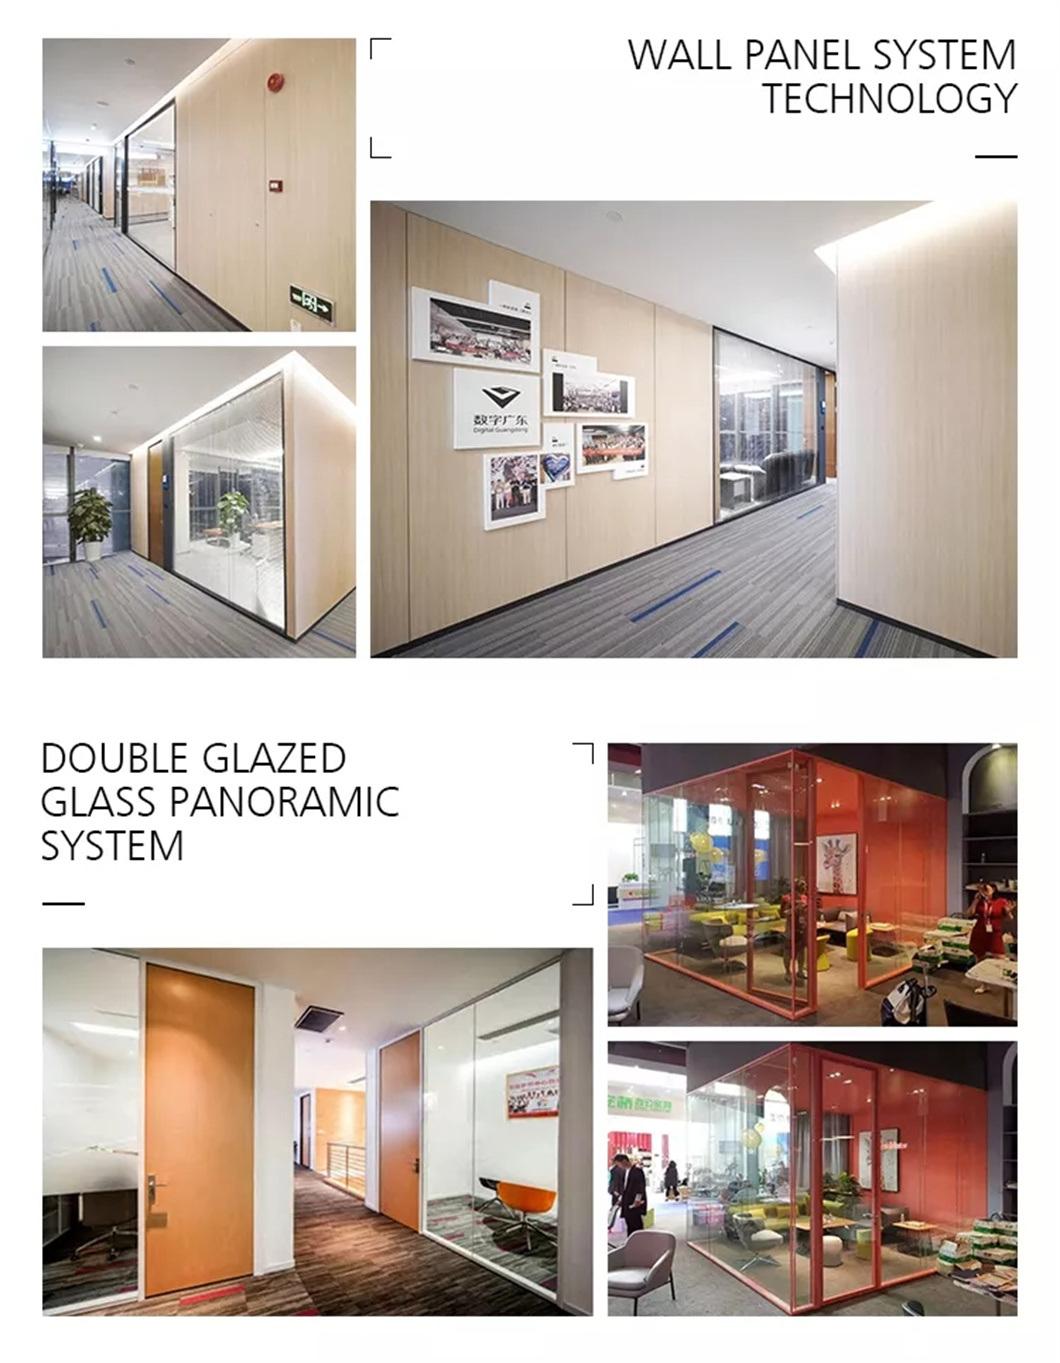 Glass PVC Dubai Wood Office Folding Partition Walls with Blind